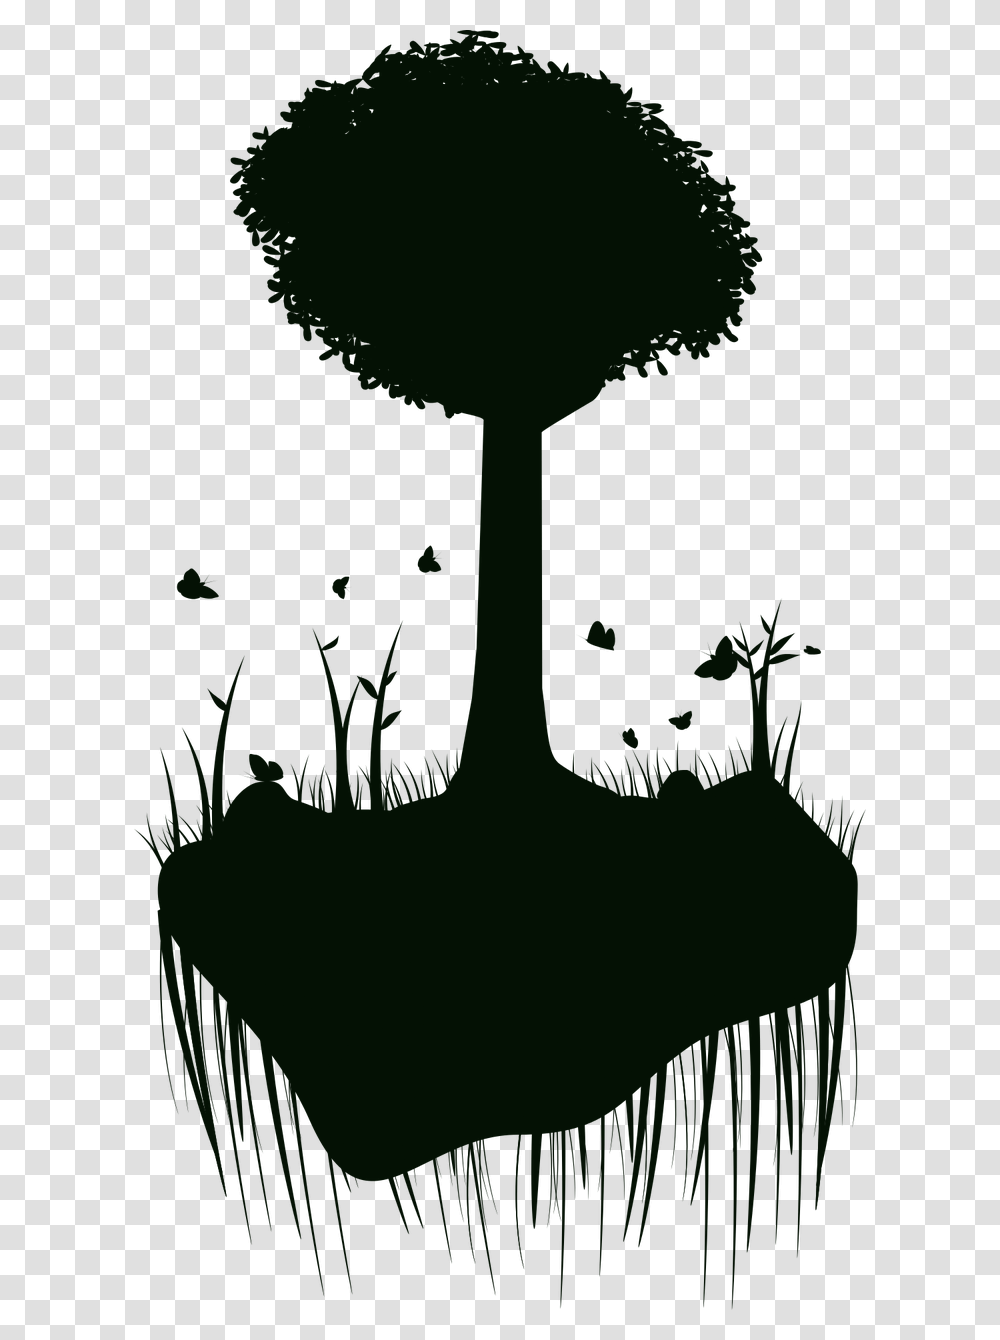 Tree Floating Island Island Silhouette, Lighting, Plant, Lamp Post, Flower Transparent Png